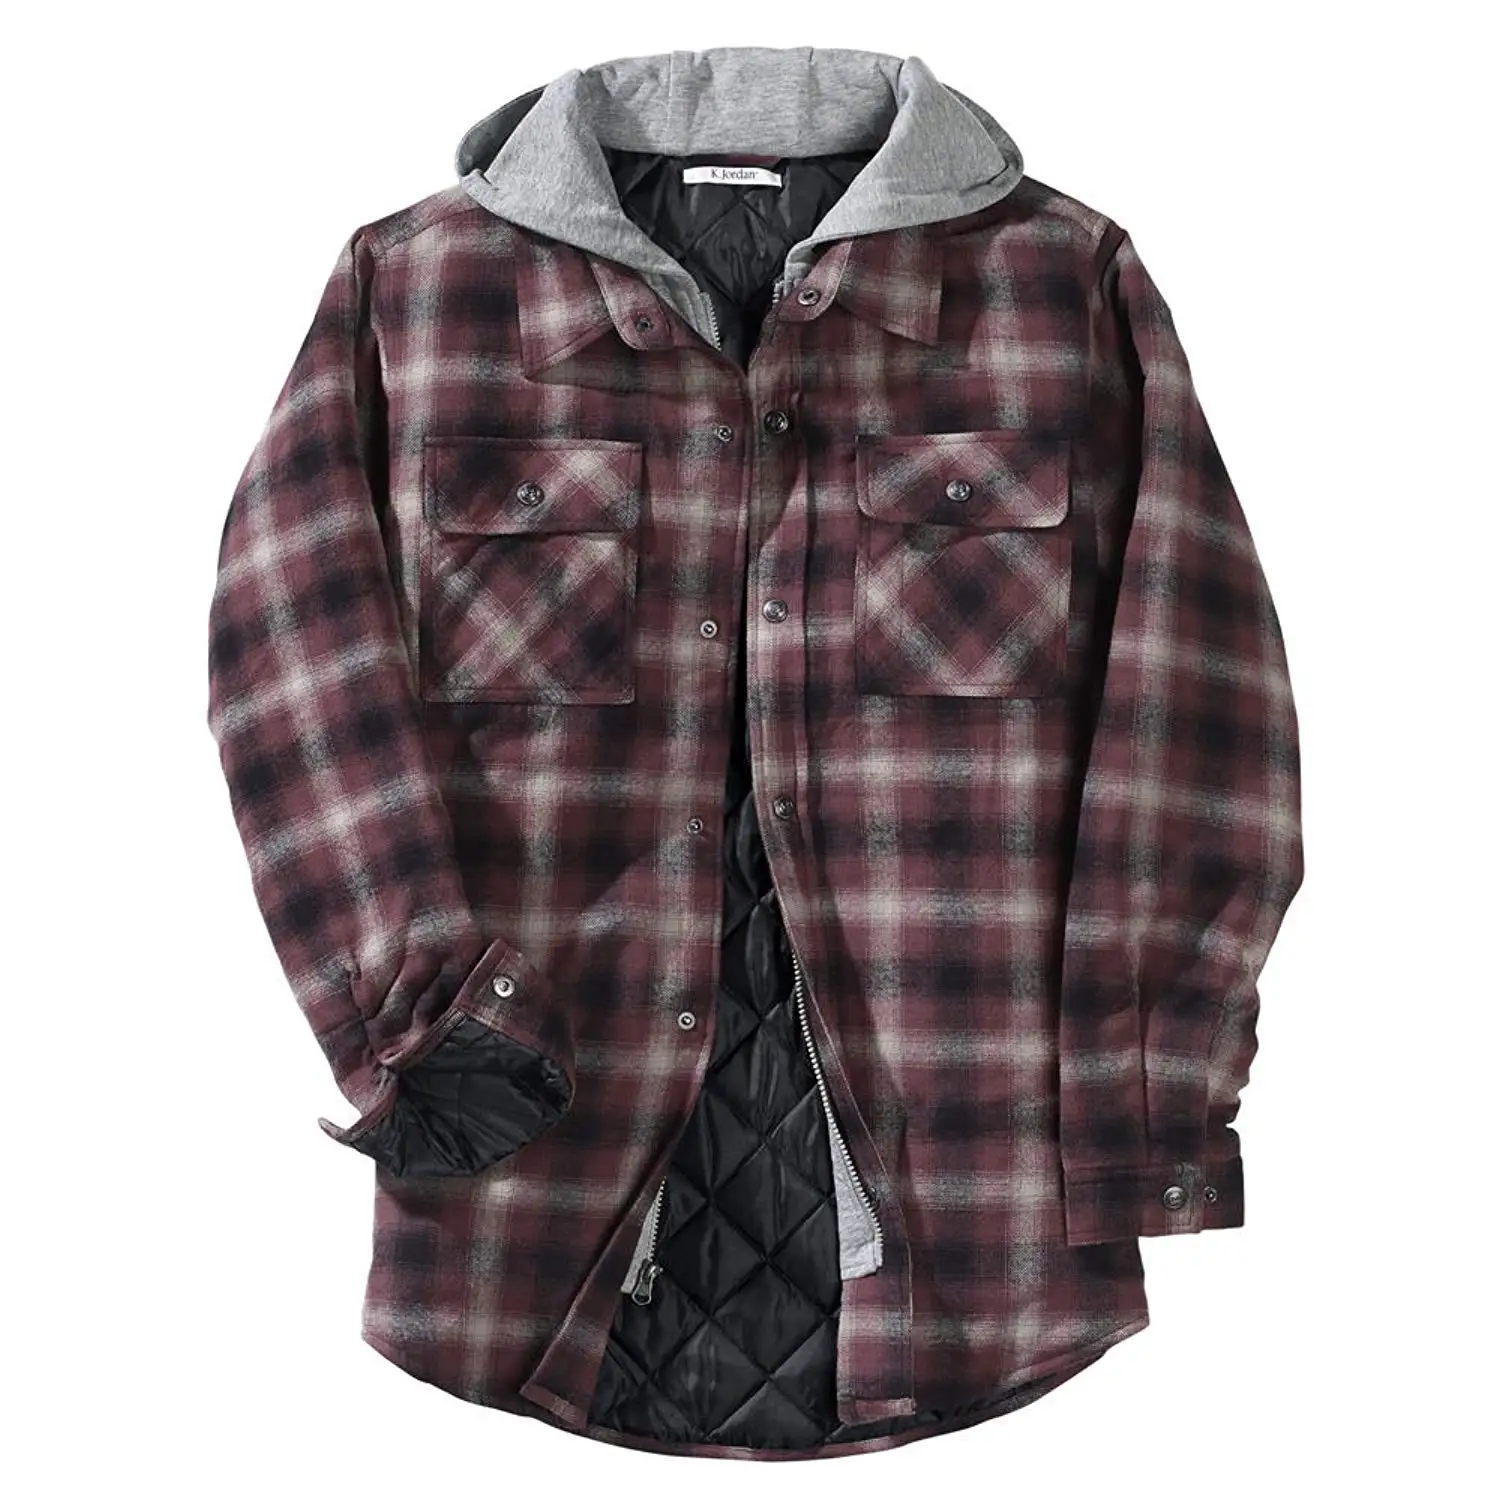 Burnside Mens 8620 Plaid Quilted Lined Flannel Full-Zip Hooded Jacket